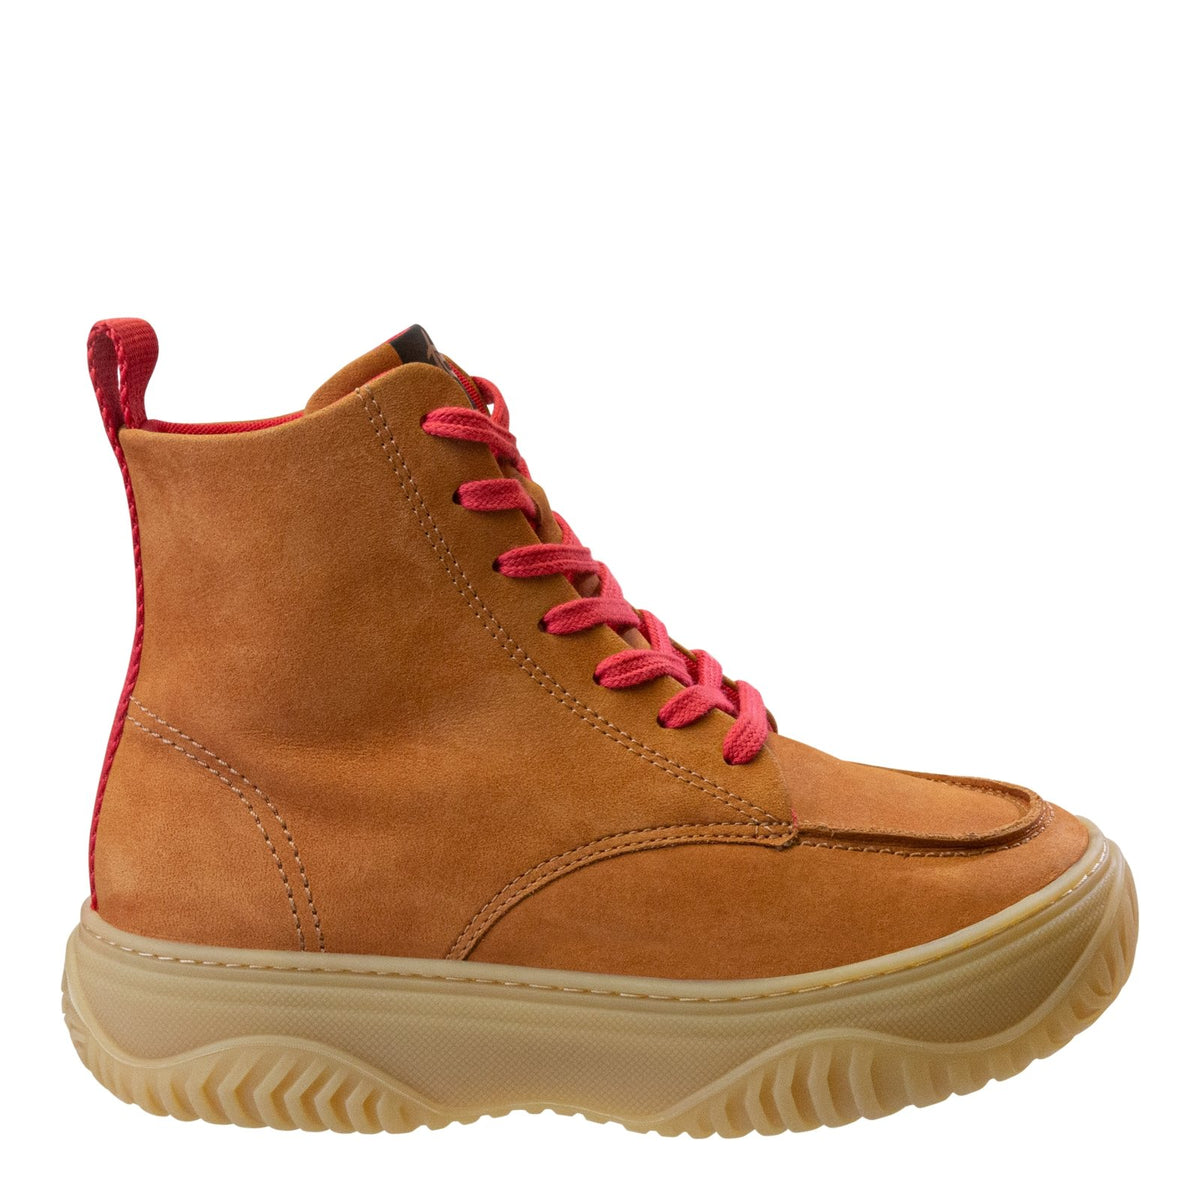 OTBT - GORP in CAMEL Sneaker Boots - J. Cole Shoes